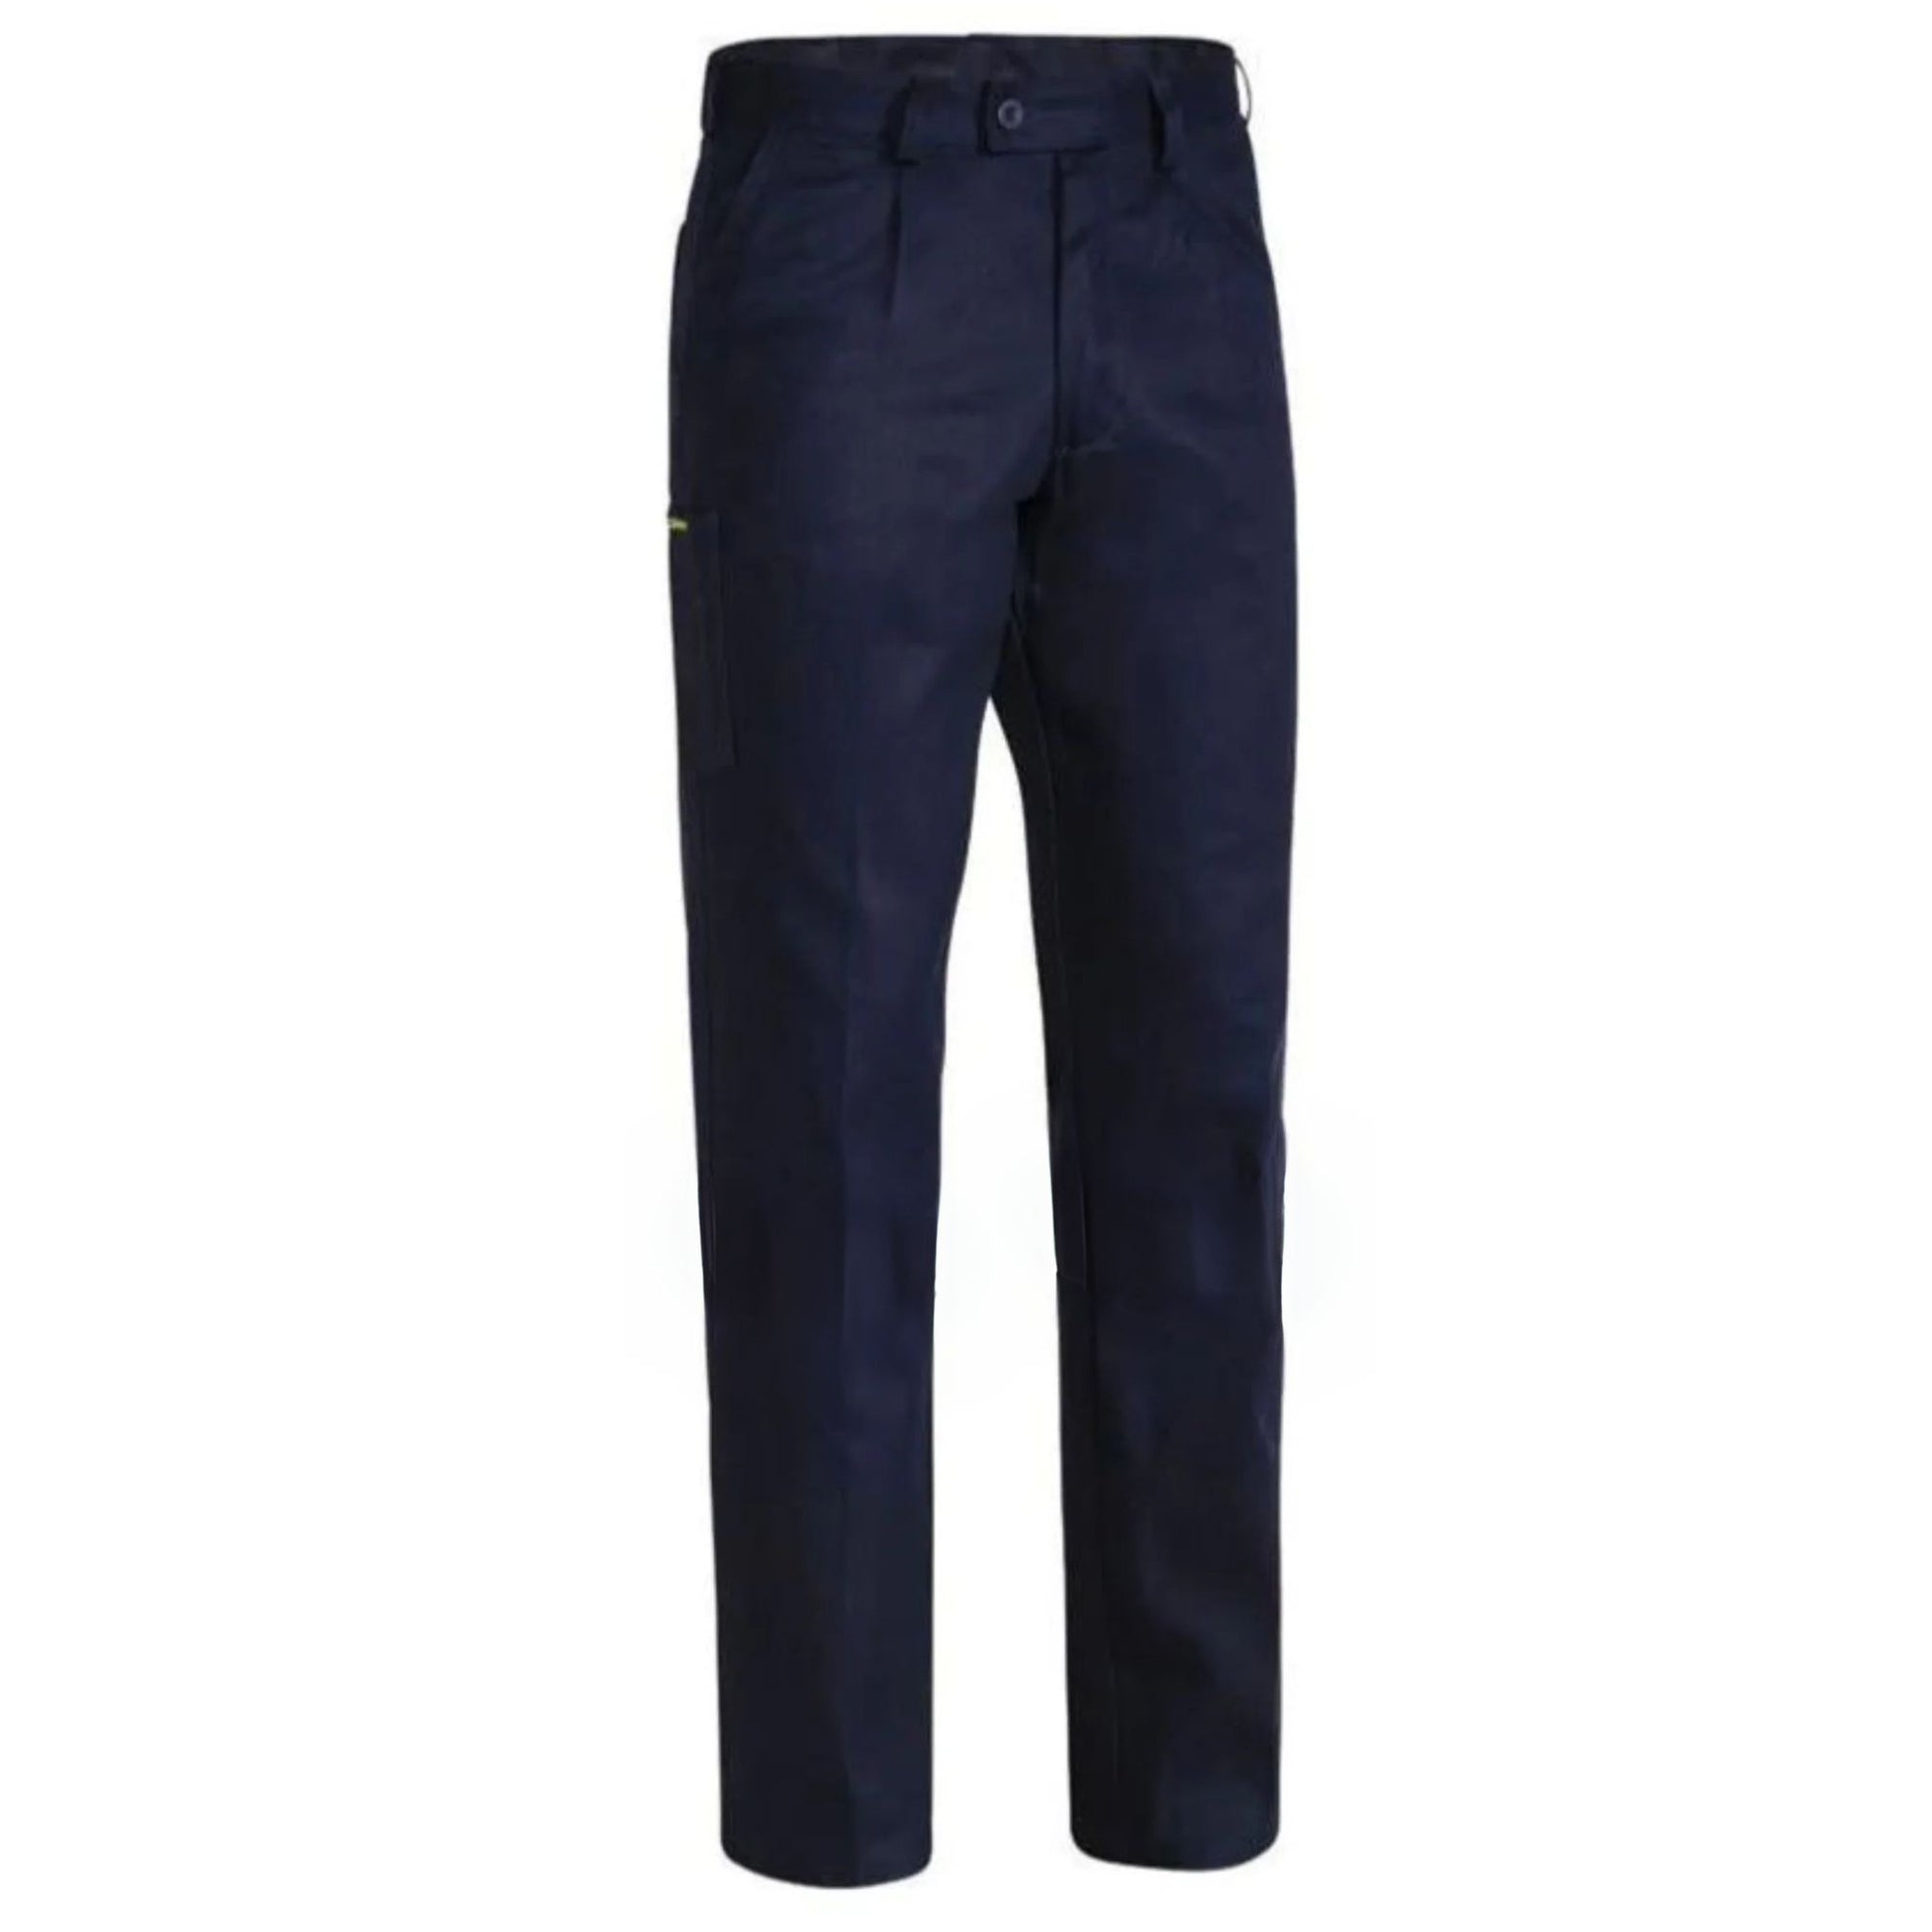 WORKIT Cotton Drill Work Pants - ONE SIDE POCKET - South East Clearance Centre